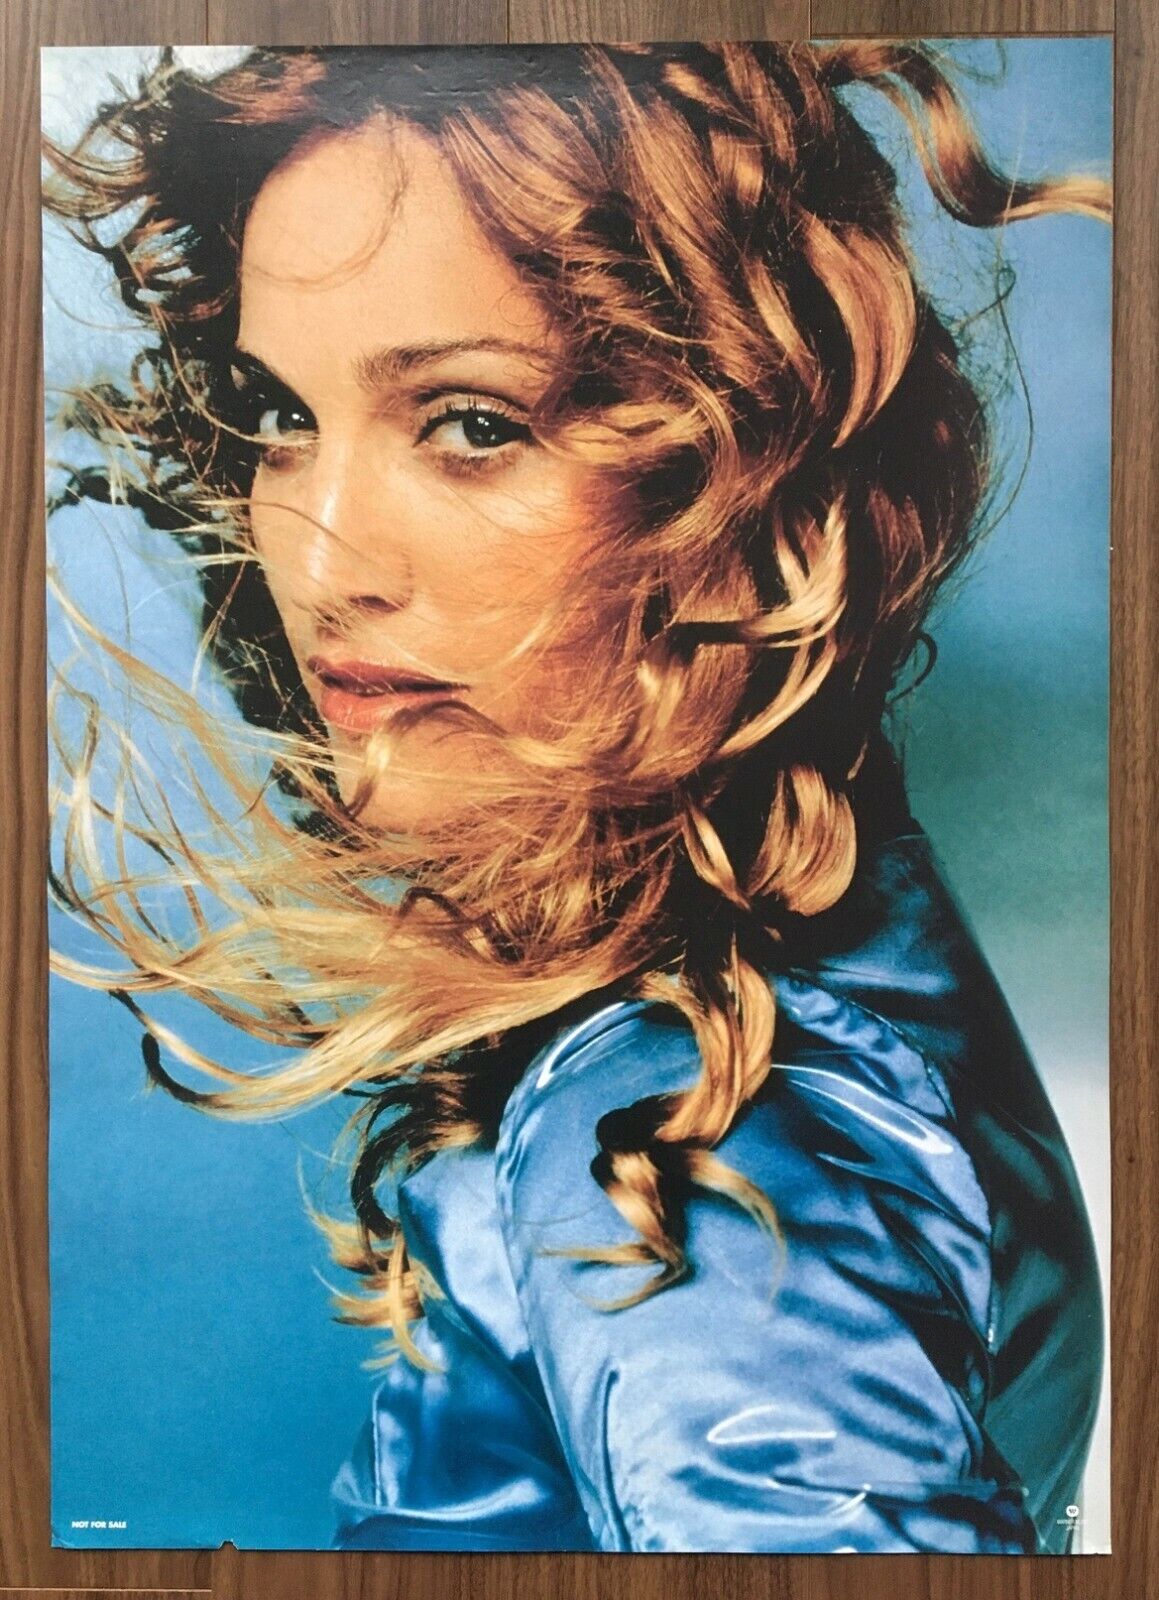 Free Ship! Madonna Japan Promo Poster Ray Of Light More Listed Listing 2 Damaged